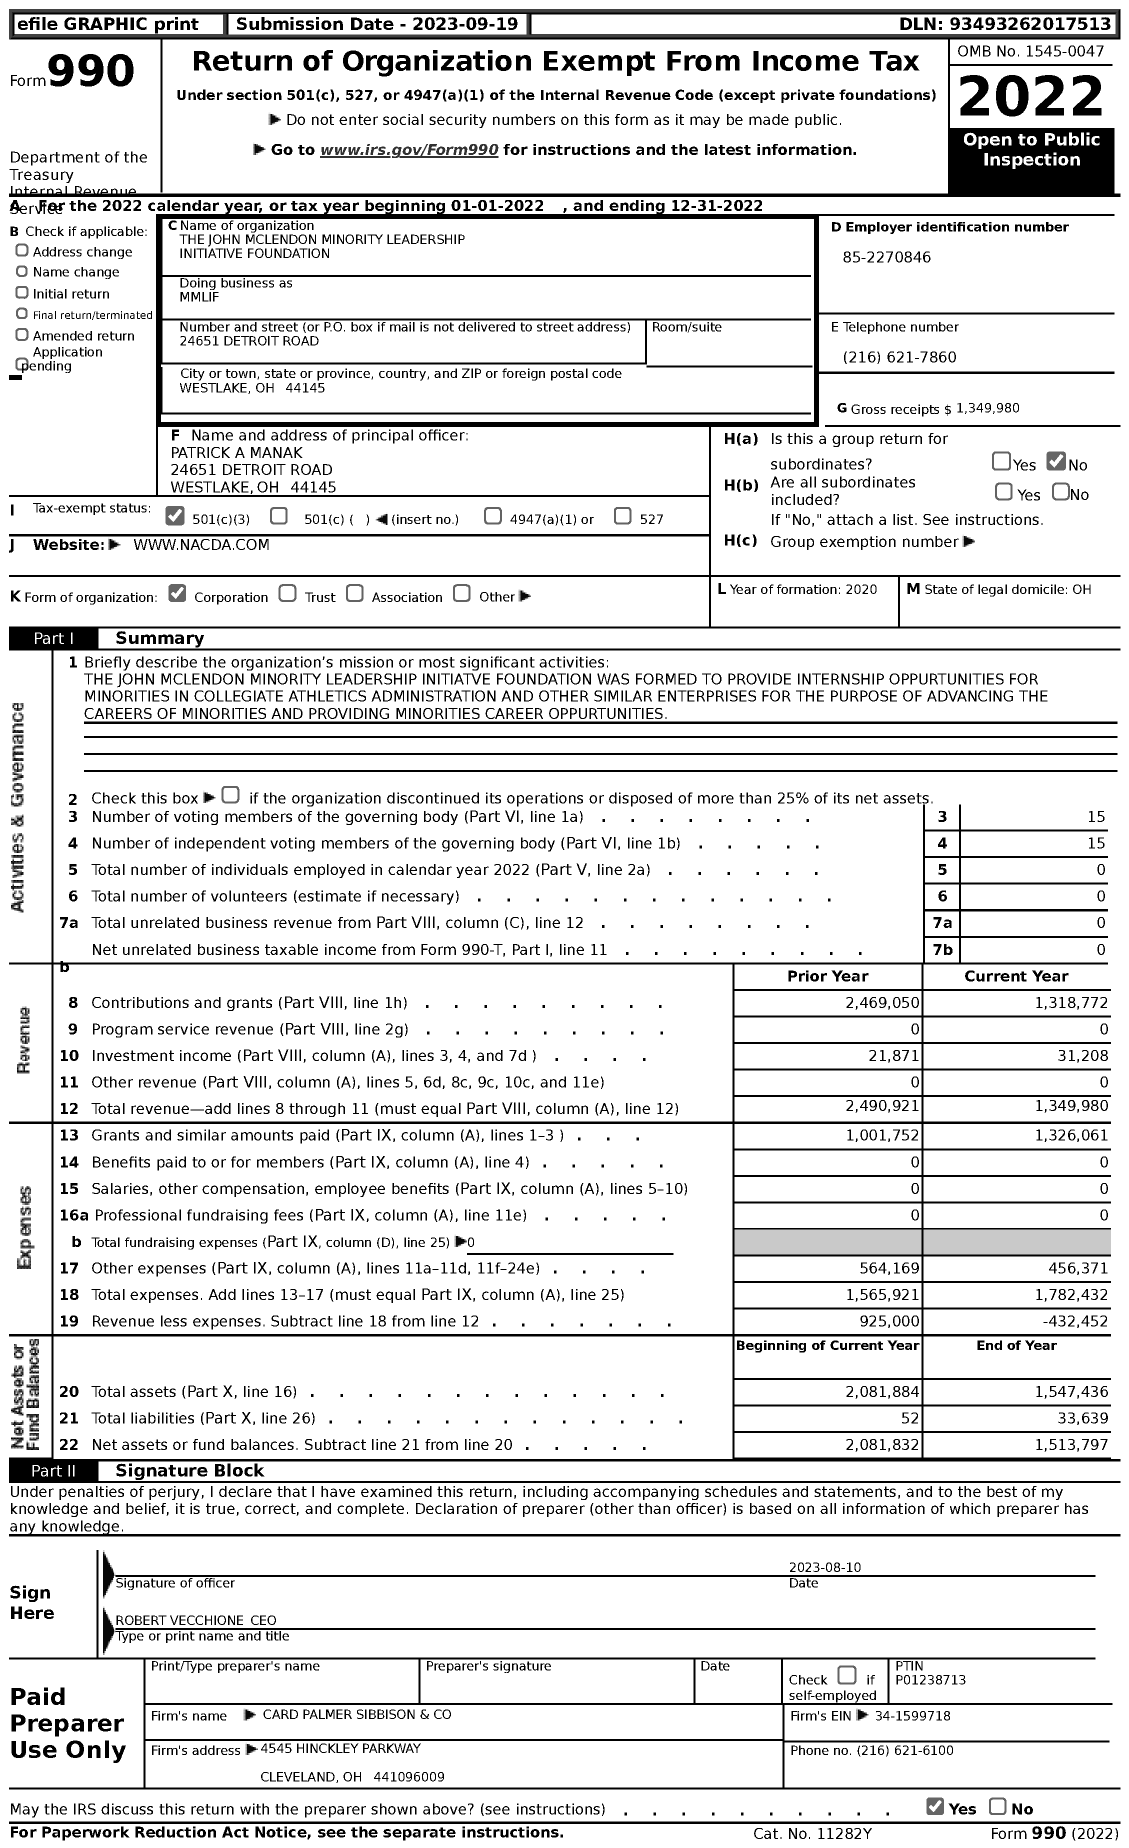 Image of first page of 2022 Form 990 for The John Mclendon Minority Leadership Initiative Foundation (MMLIF)